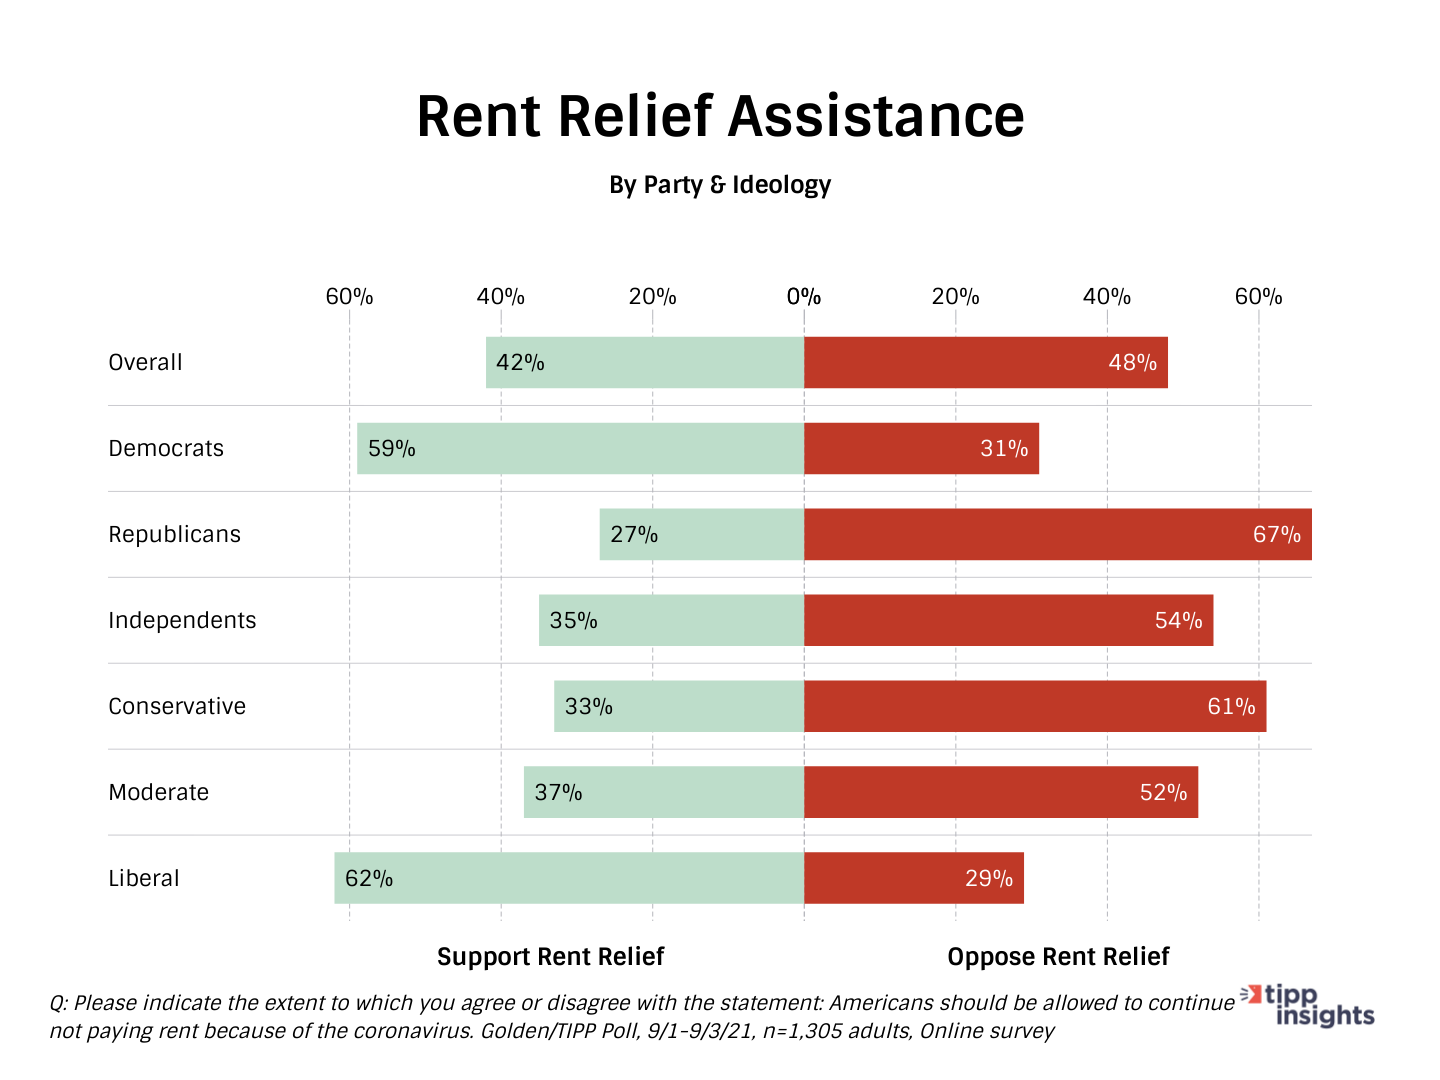 TIPP/Golden Poll Results: Americans in support or opposition of Rent relief assistance, along party ideology lines